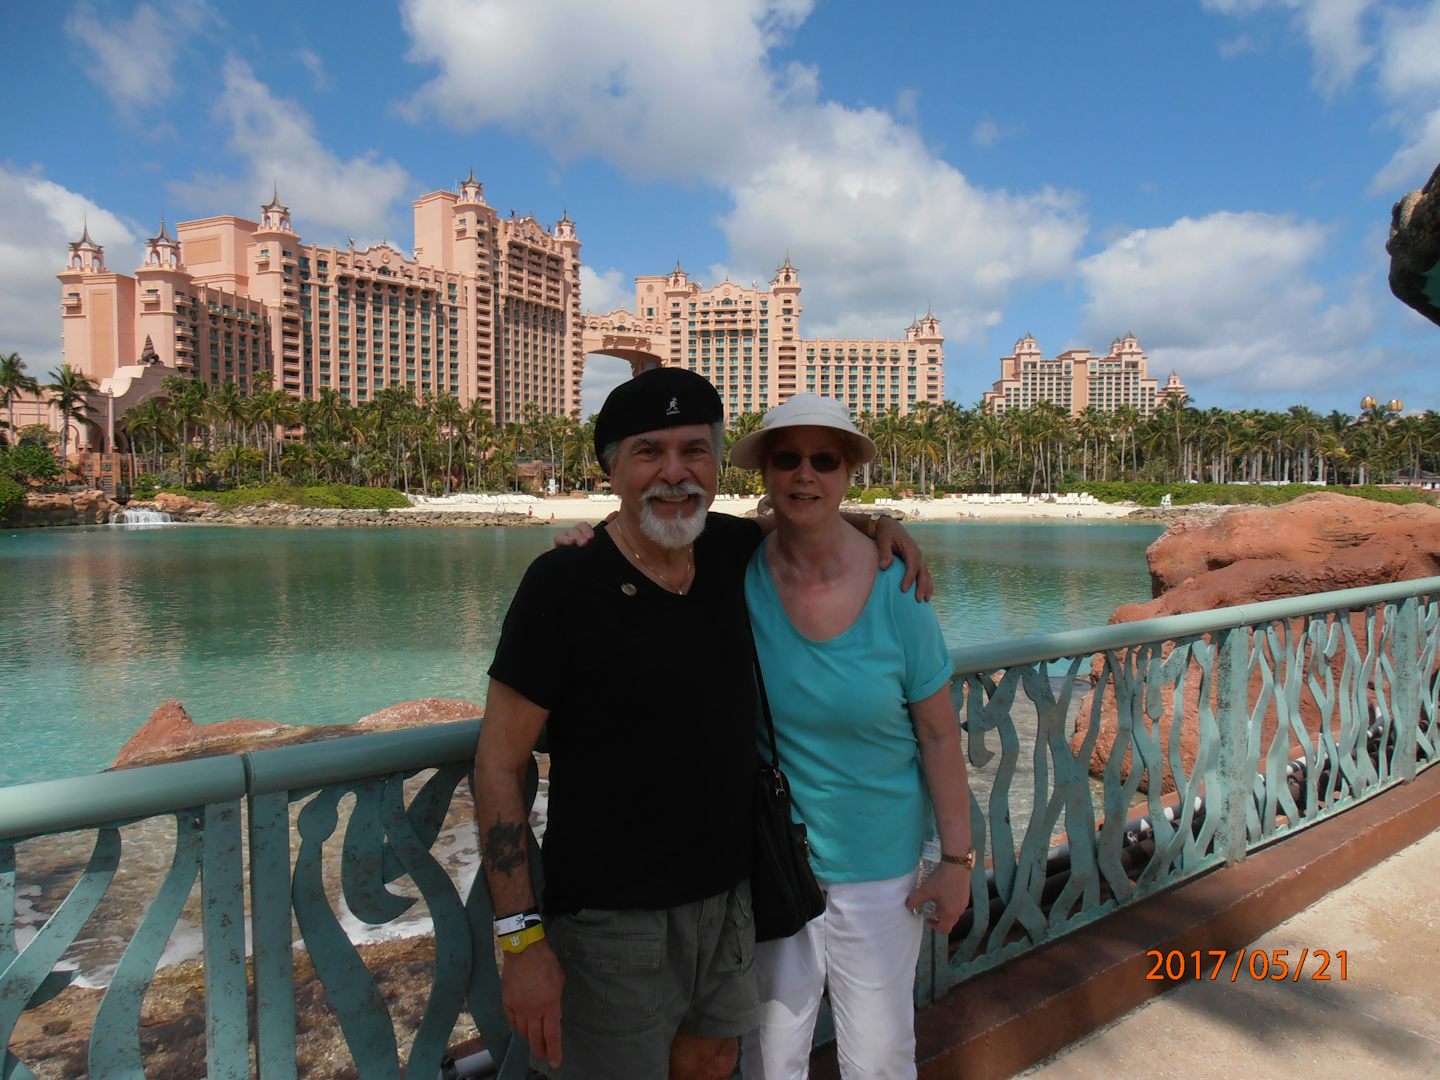 photo is my wife and I with Atlantis in background